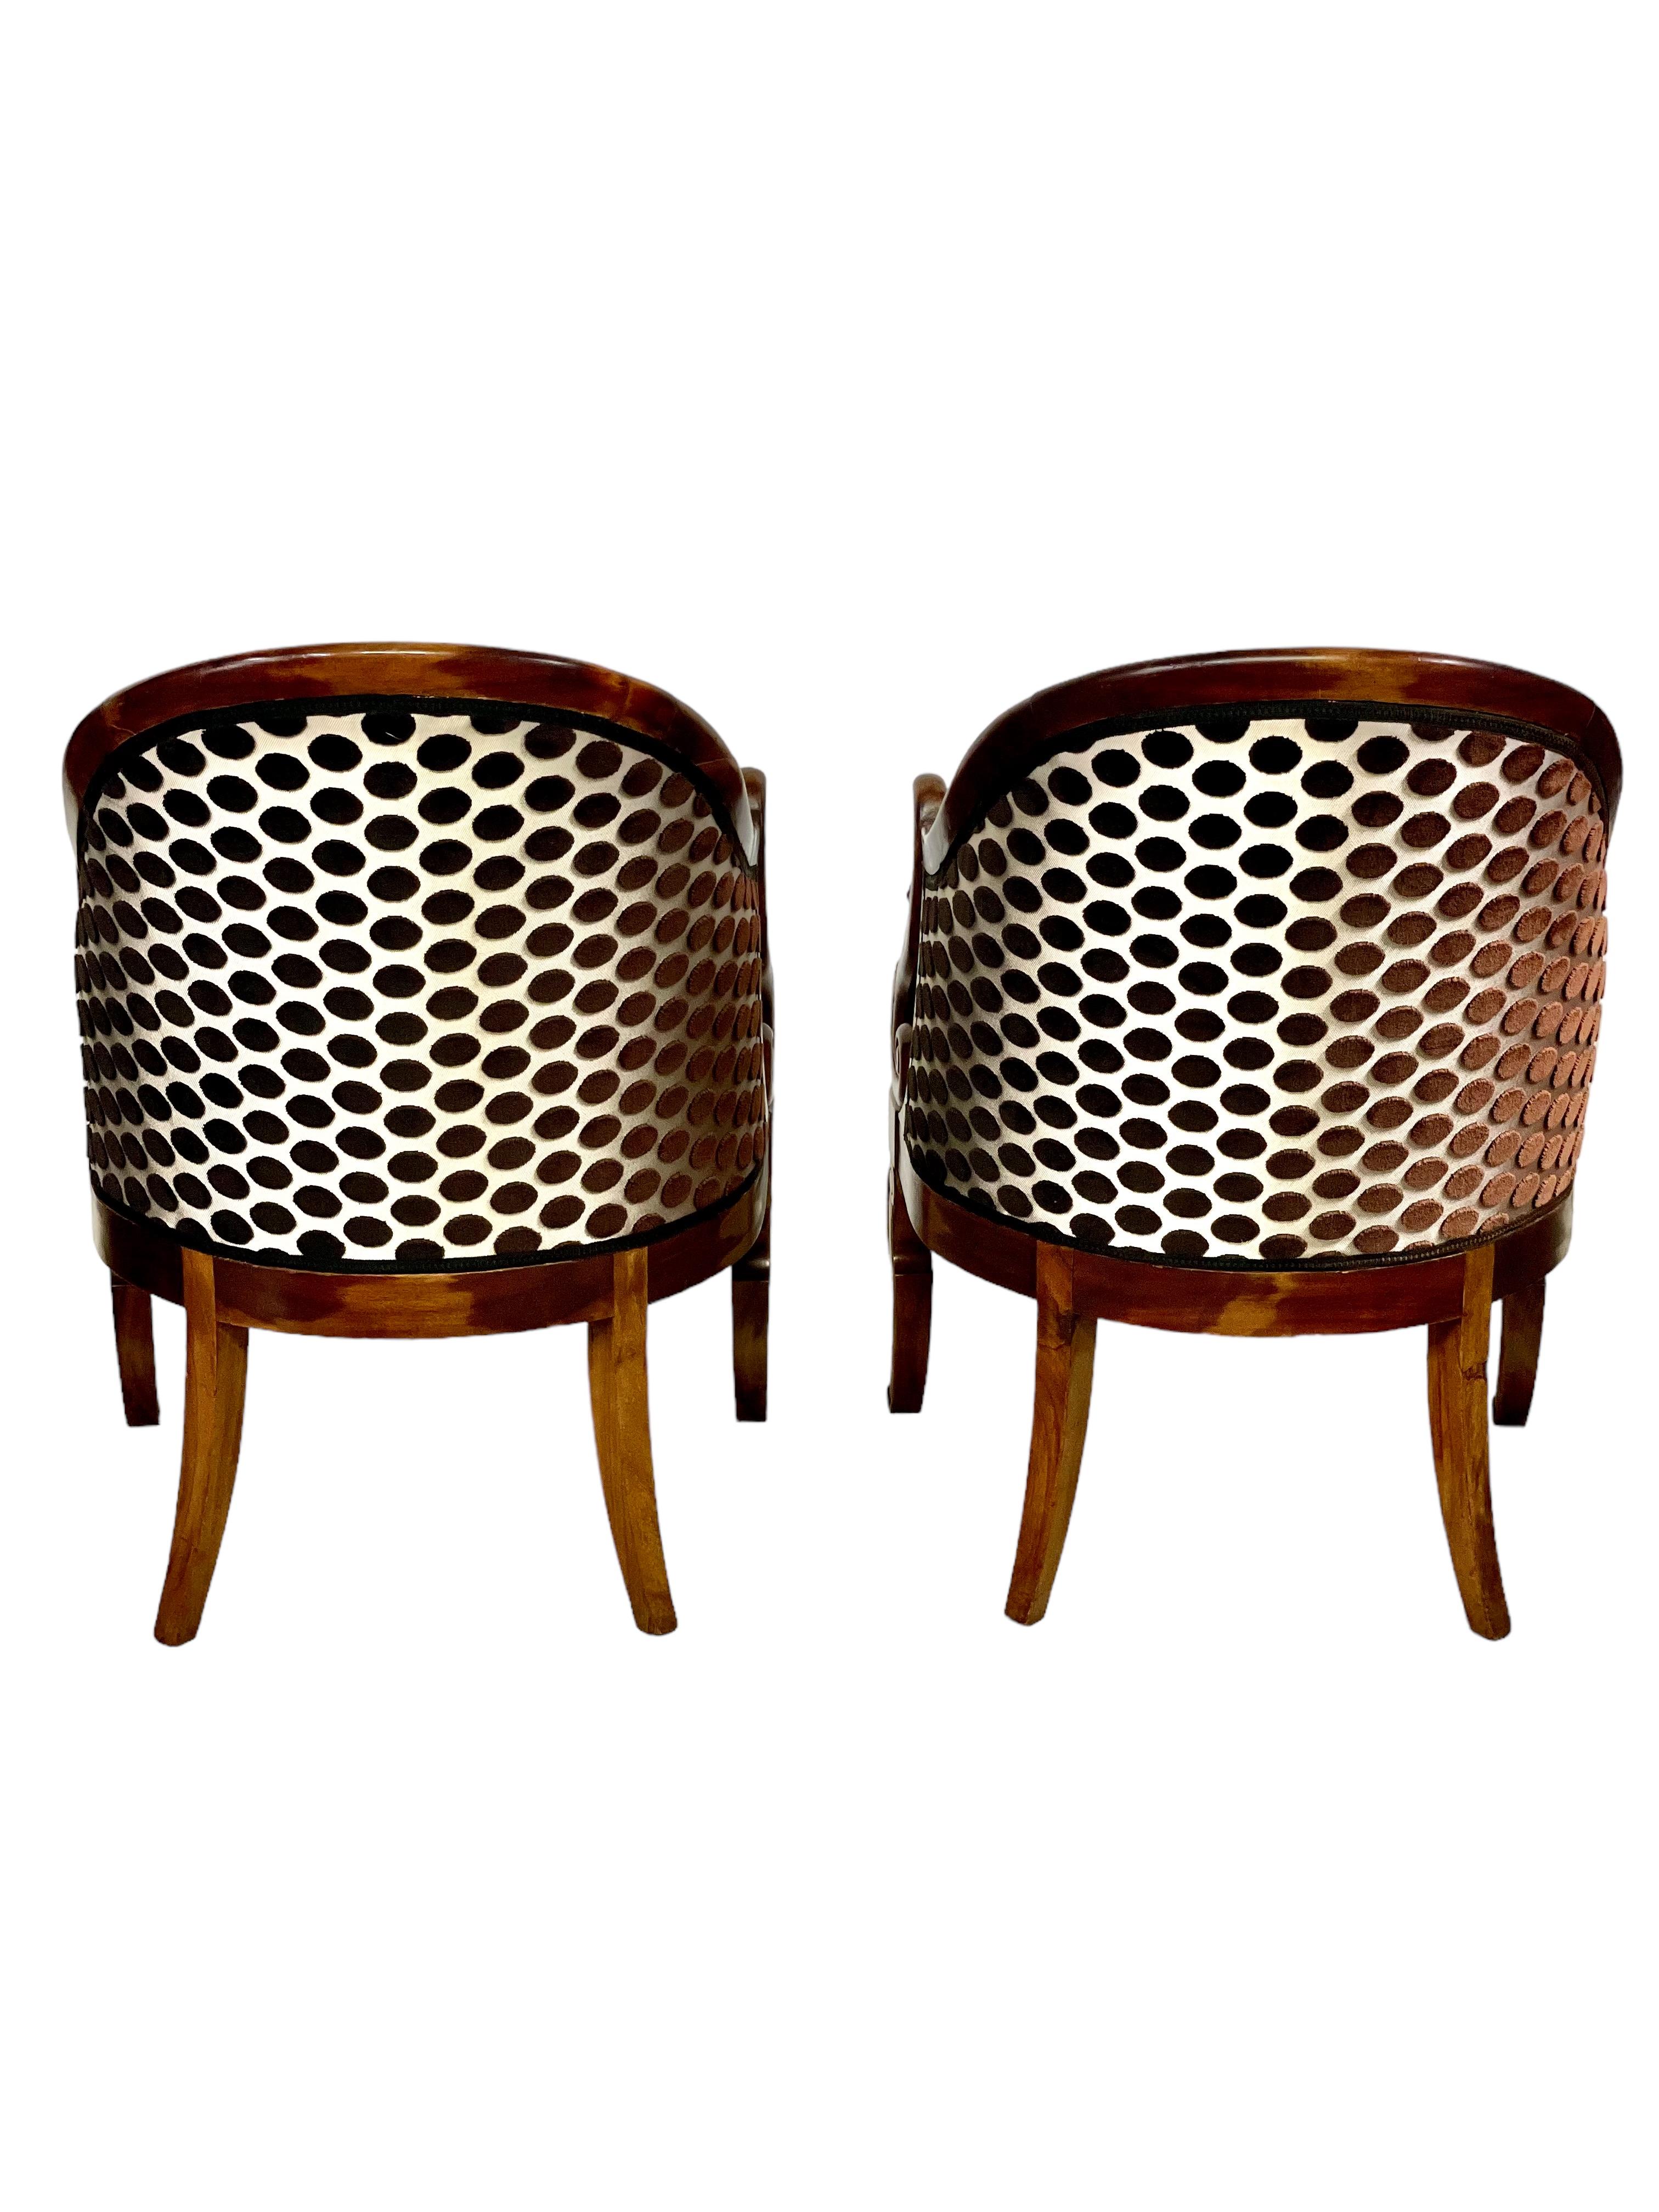 20th Century Pair of Empire Style Bergères Chairs with Gondola Shape Backrest For Sale